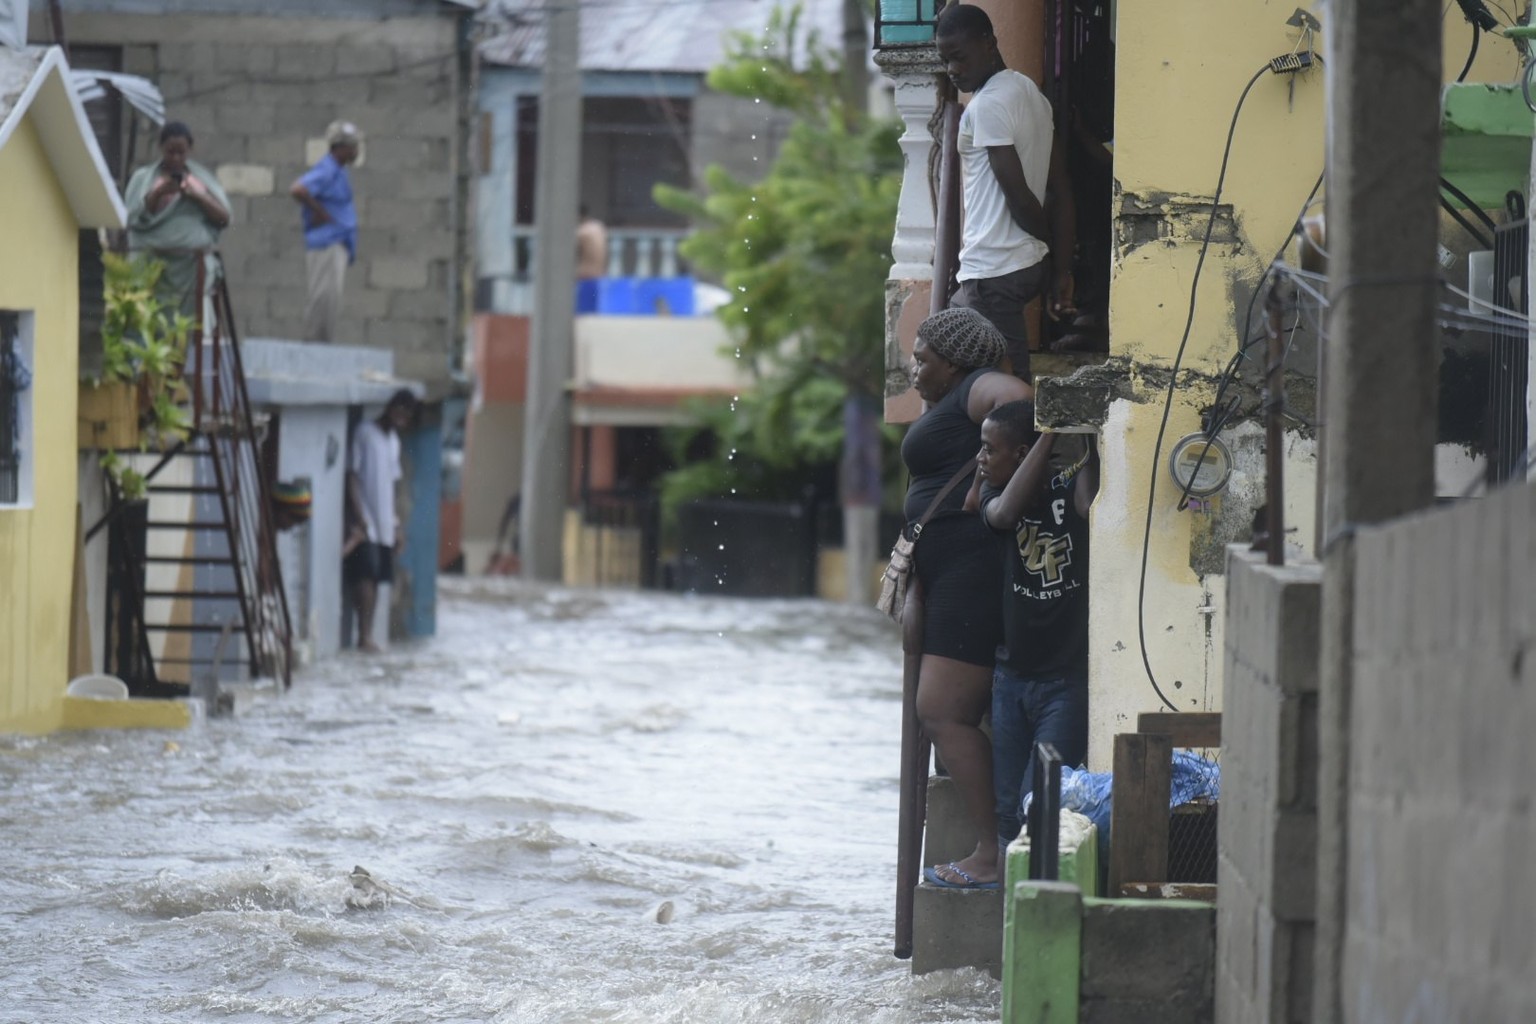 epa06190107 People watch flooded water in a street in Santiago de los Caballeros, Dominican Republic, Dominican Republic, 07 September 2017. More than 5,500 people have been evacuated in the Dominican ...